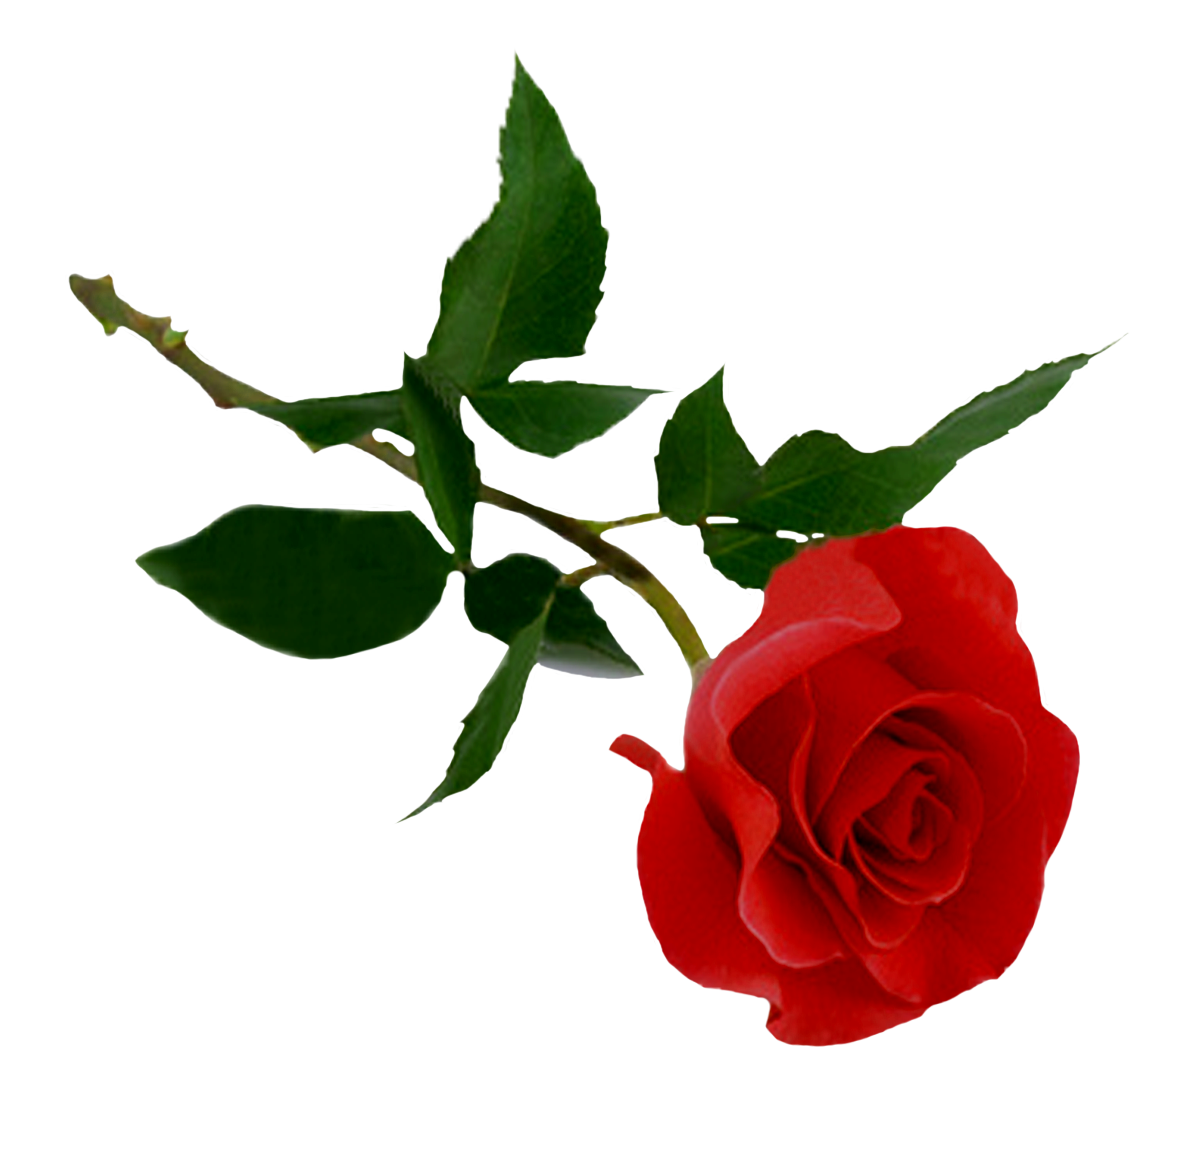 Download PNG image: Rose png image, free picture download